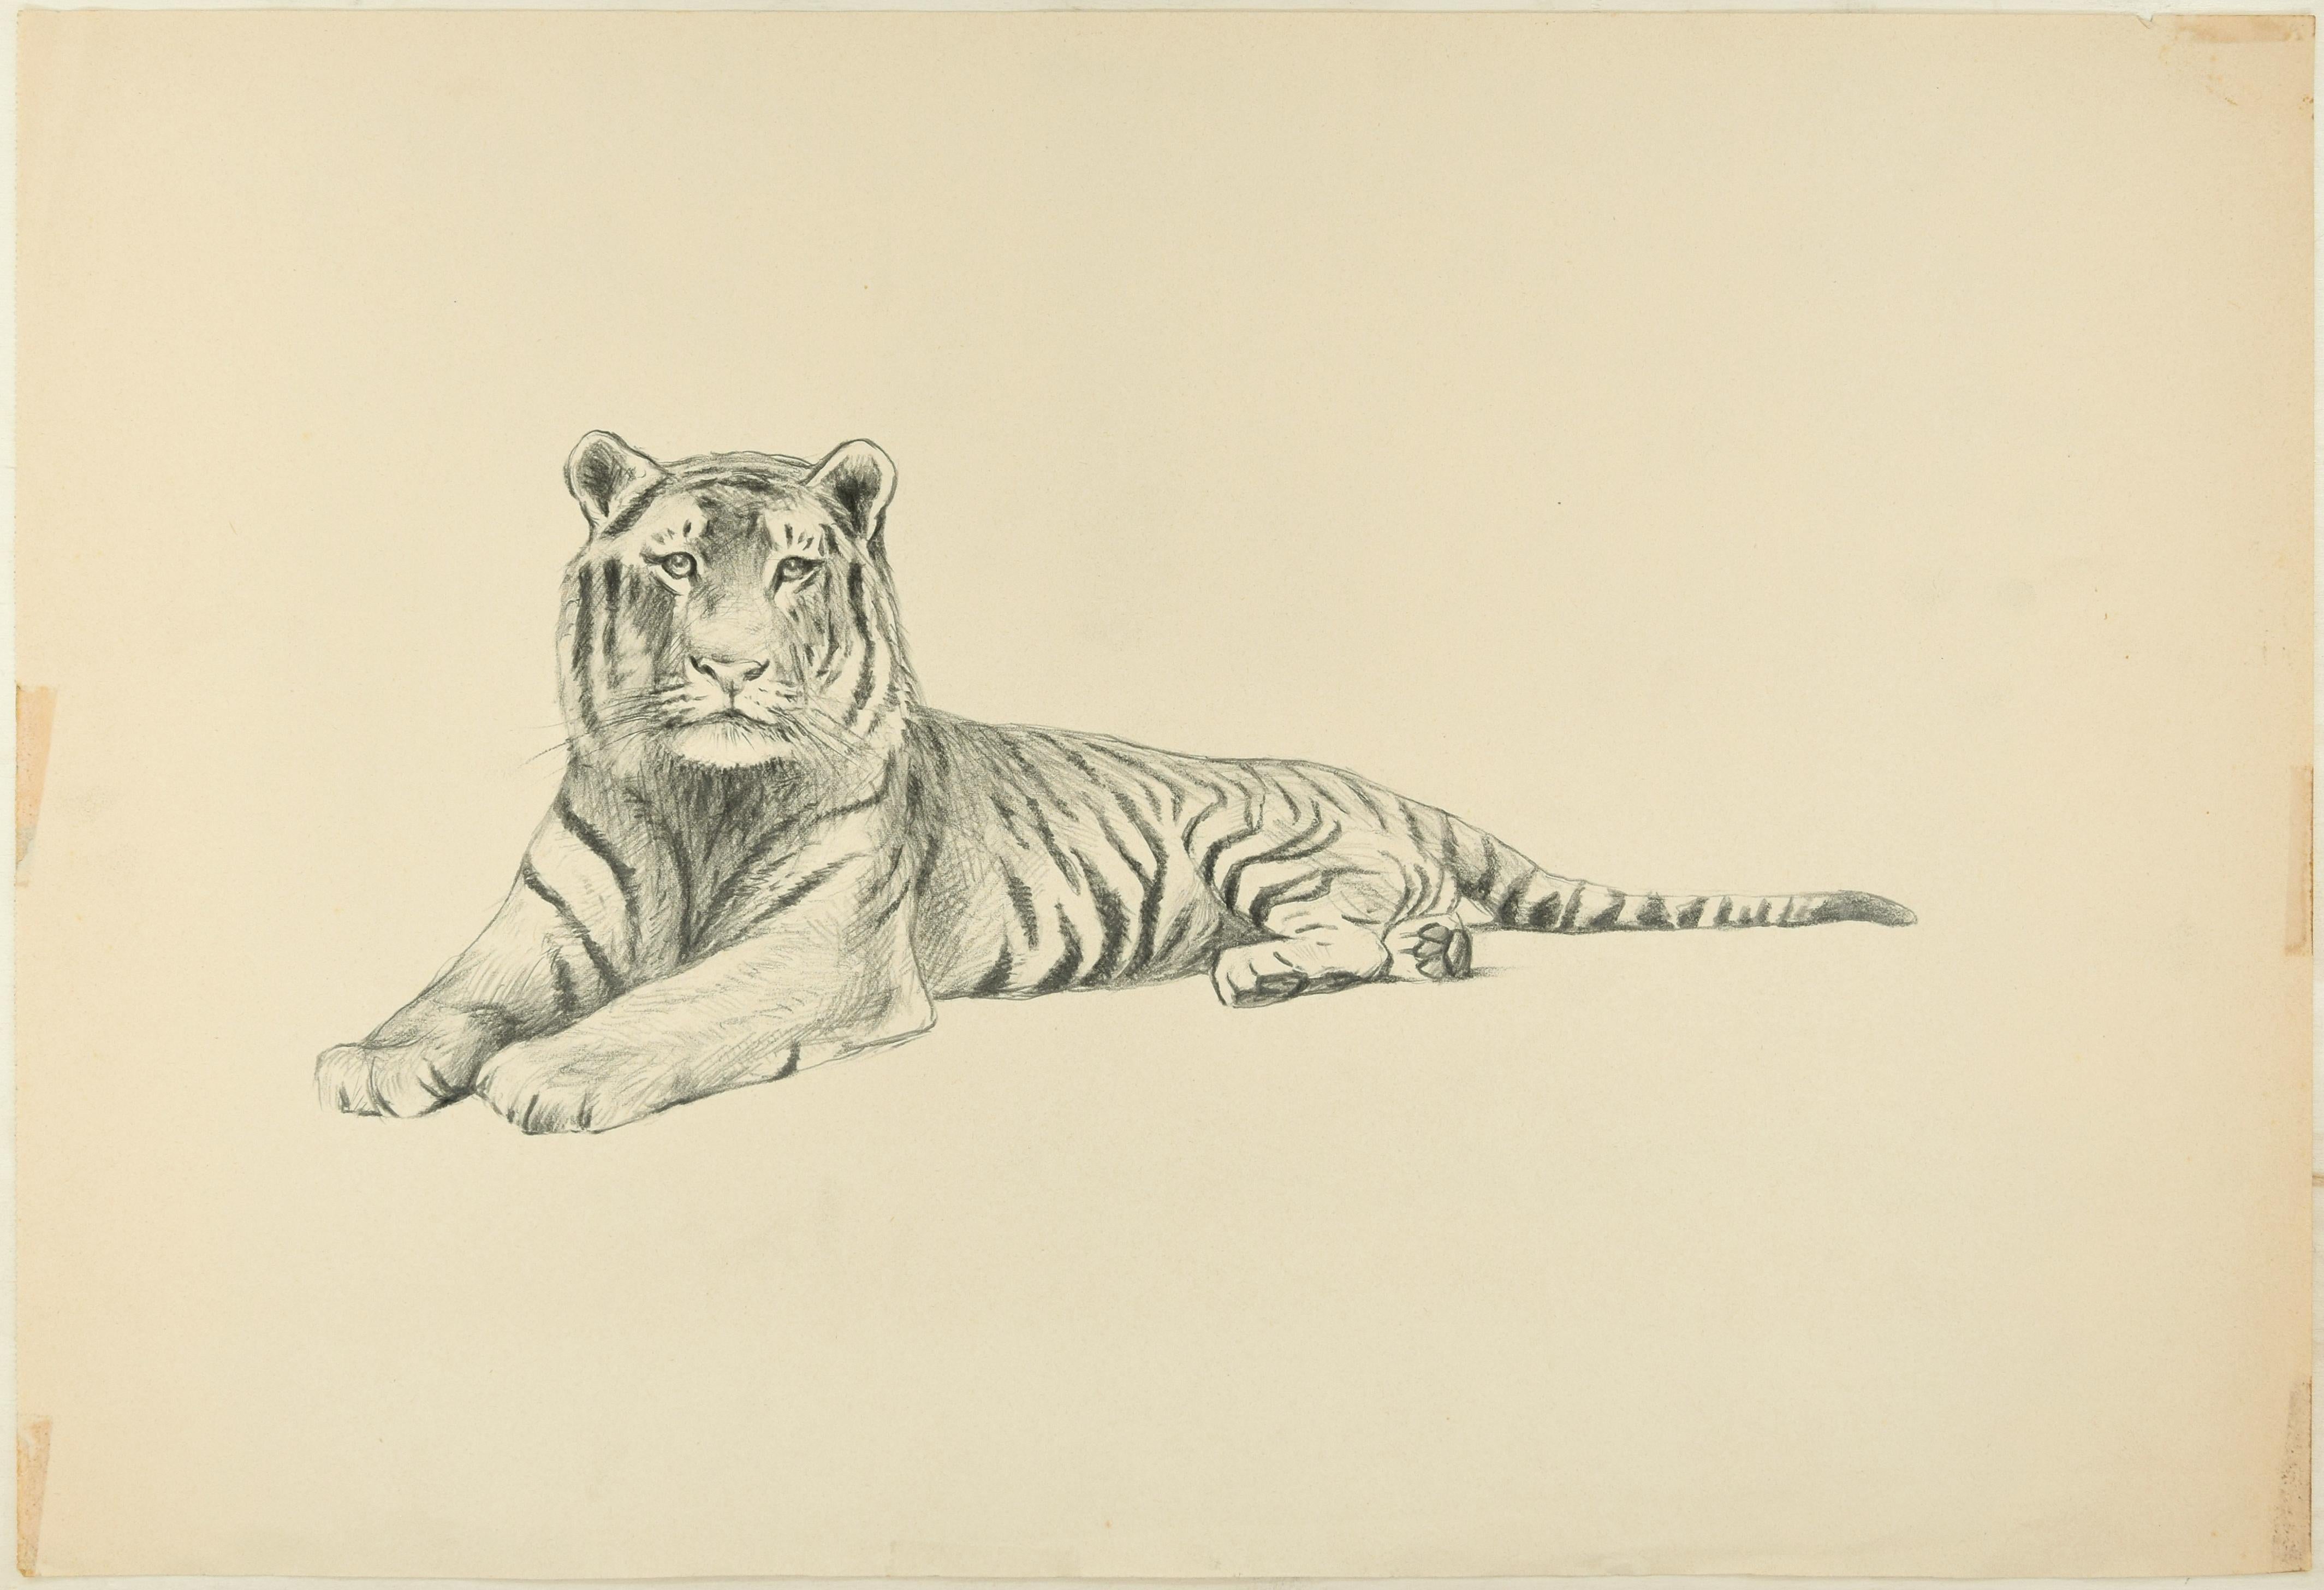 Lying Down Tiger - Original Pencil Drawing by Willy Lorenz - 1950s